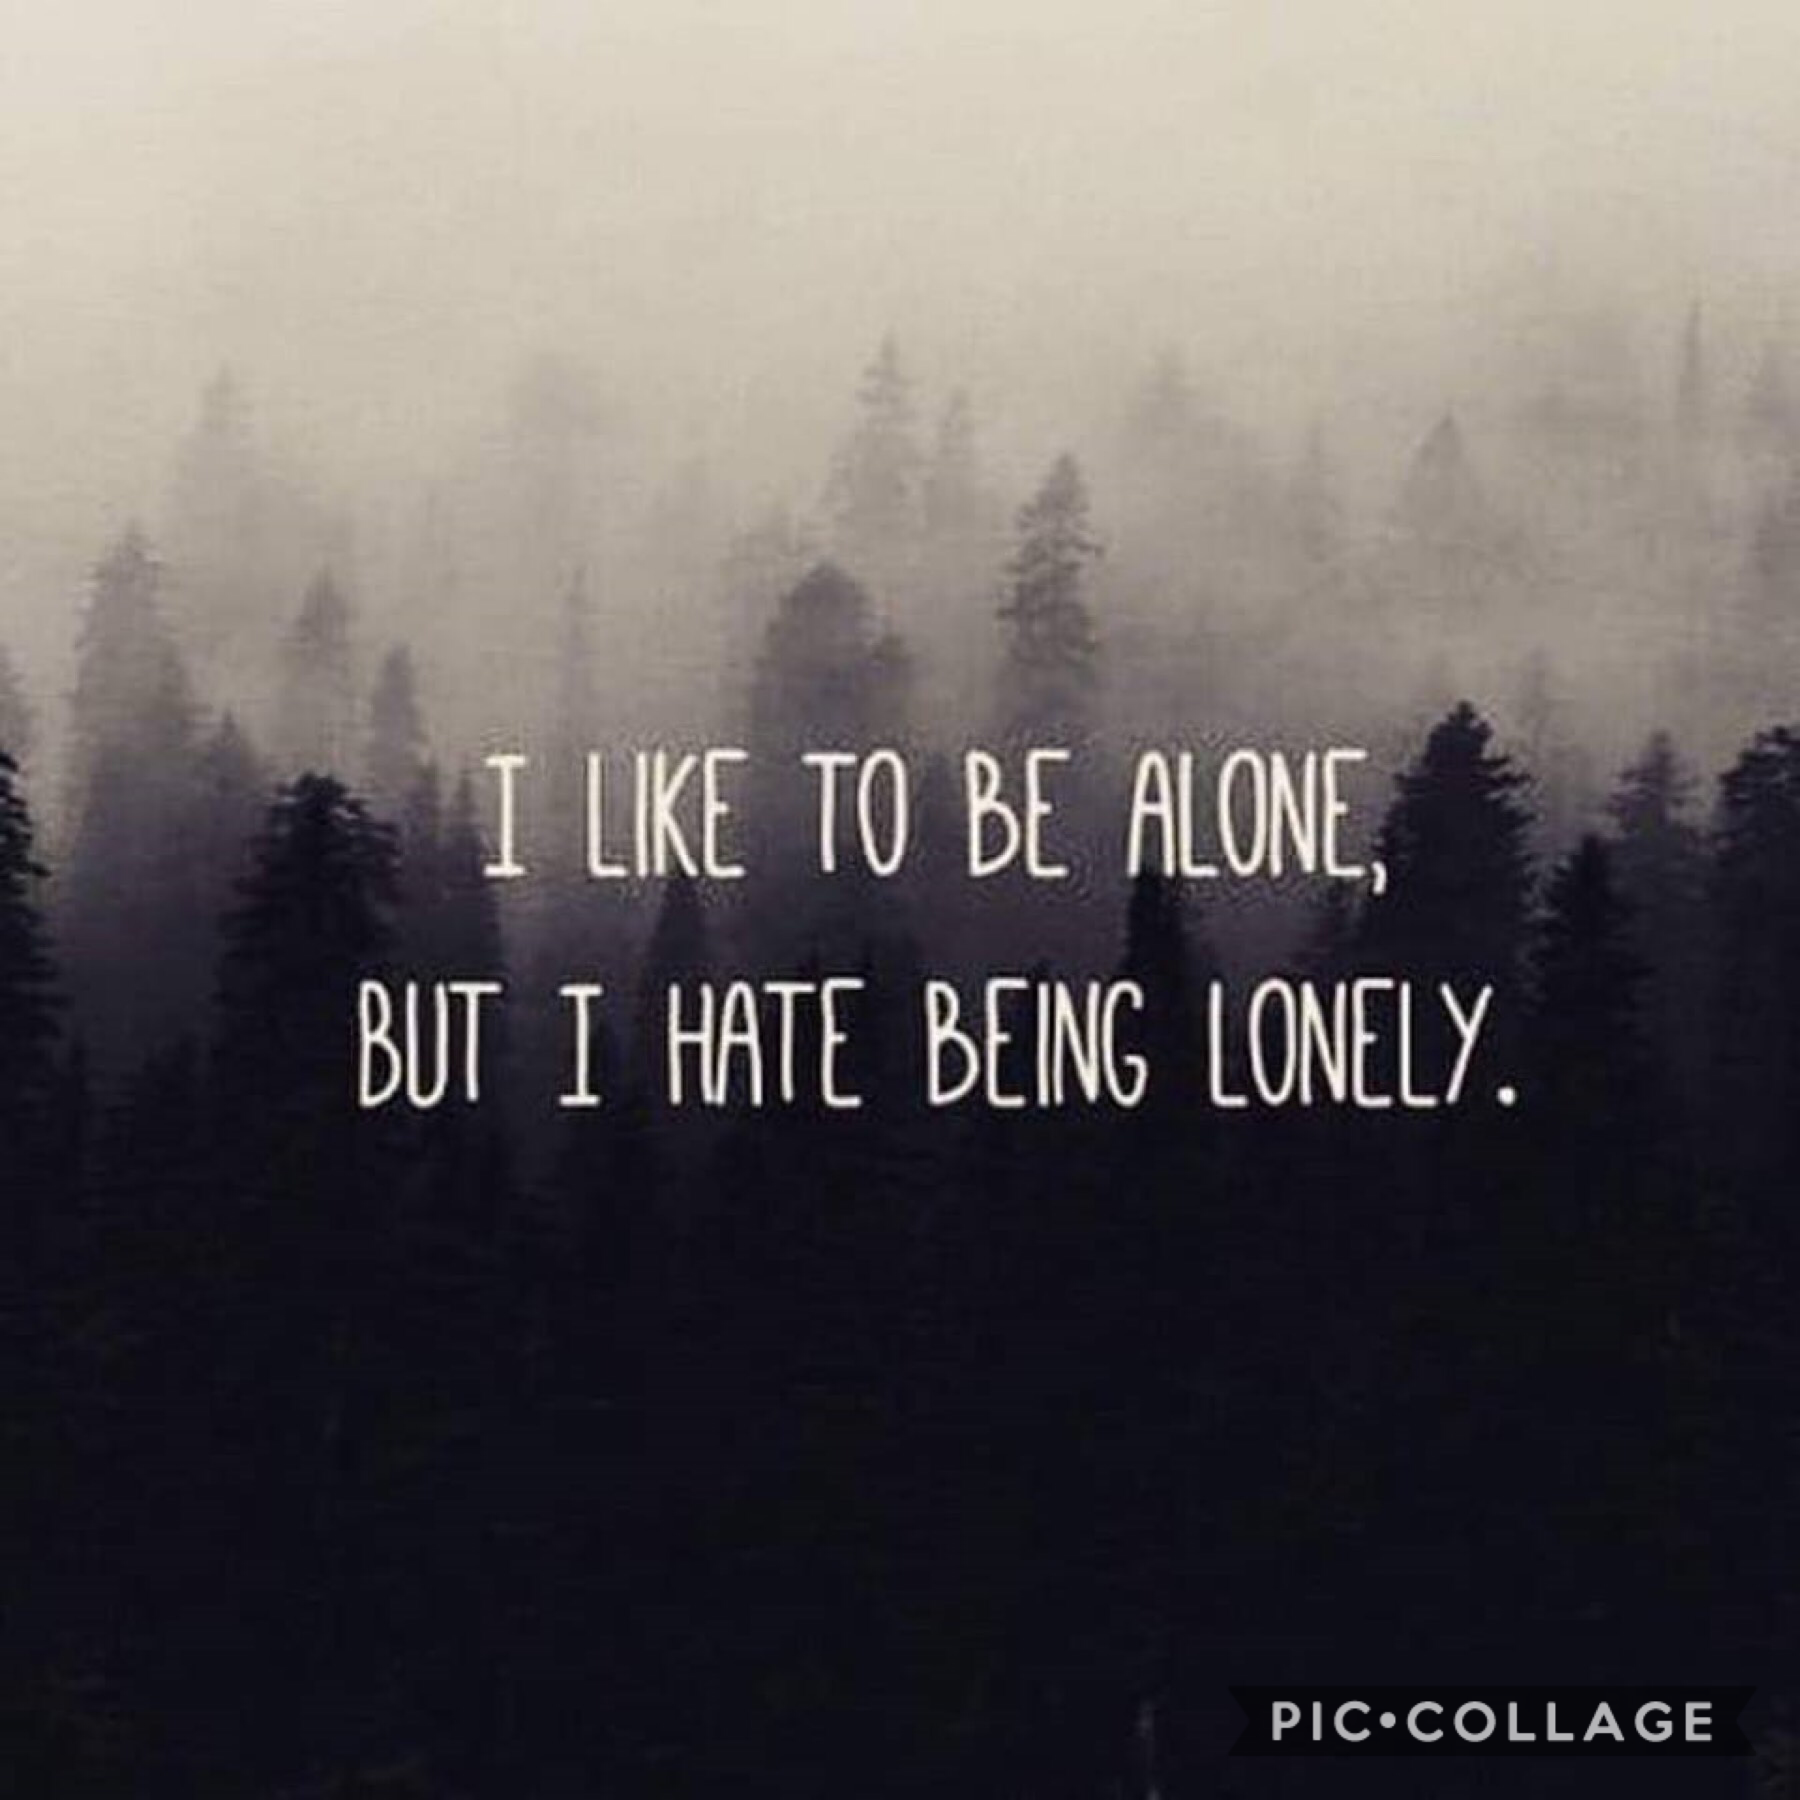 This is how I feel every time people ask me why I am so quiet and antisocial. I’m not desperate for a crowd, so I don’t like to hang out with people like them🙄